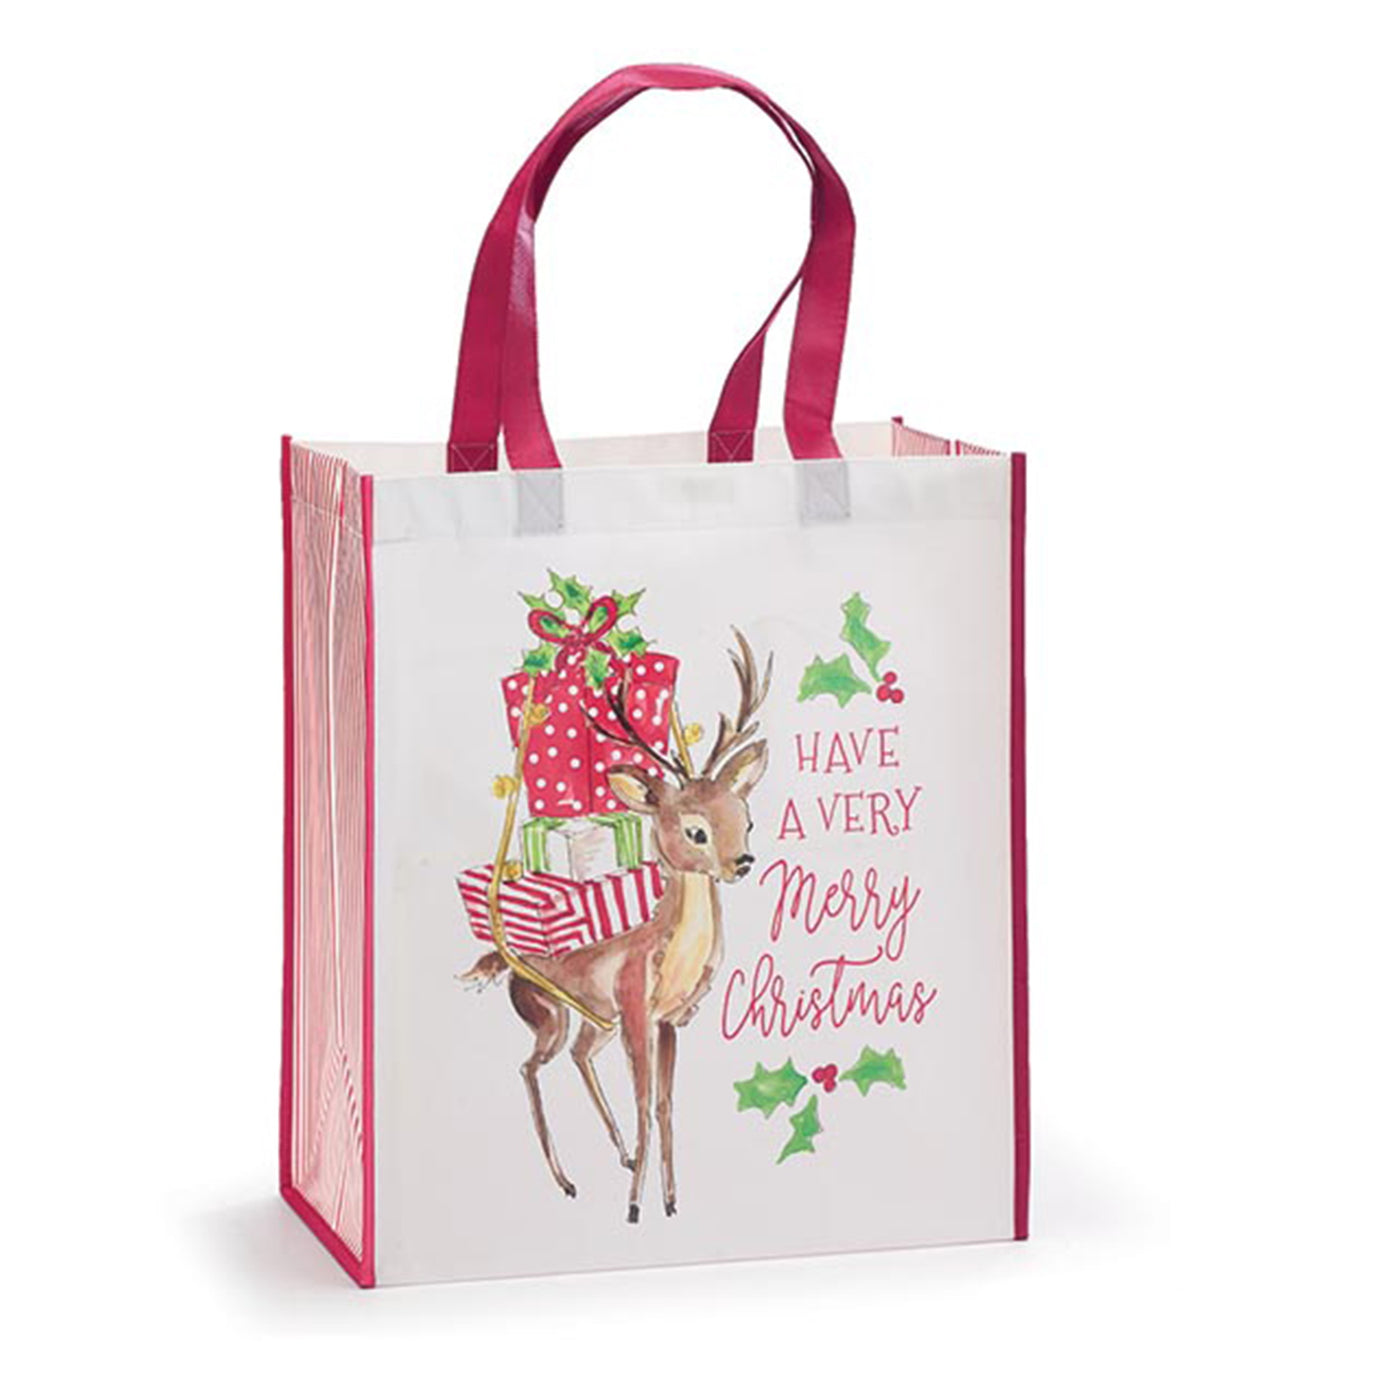 Have Yourself a Very Merry Christmas Tote